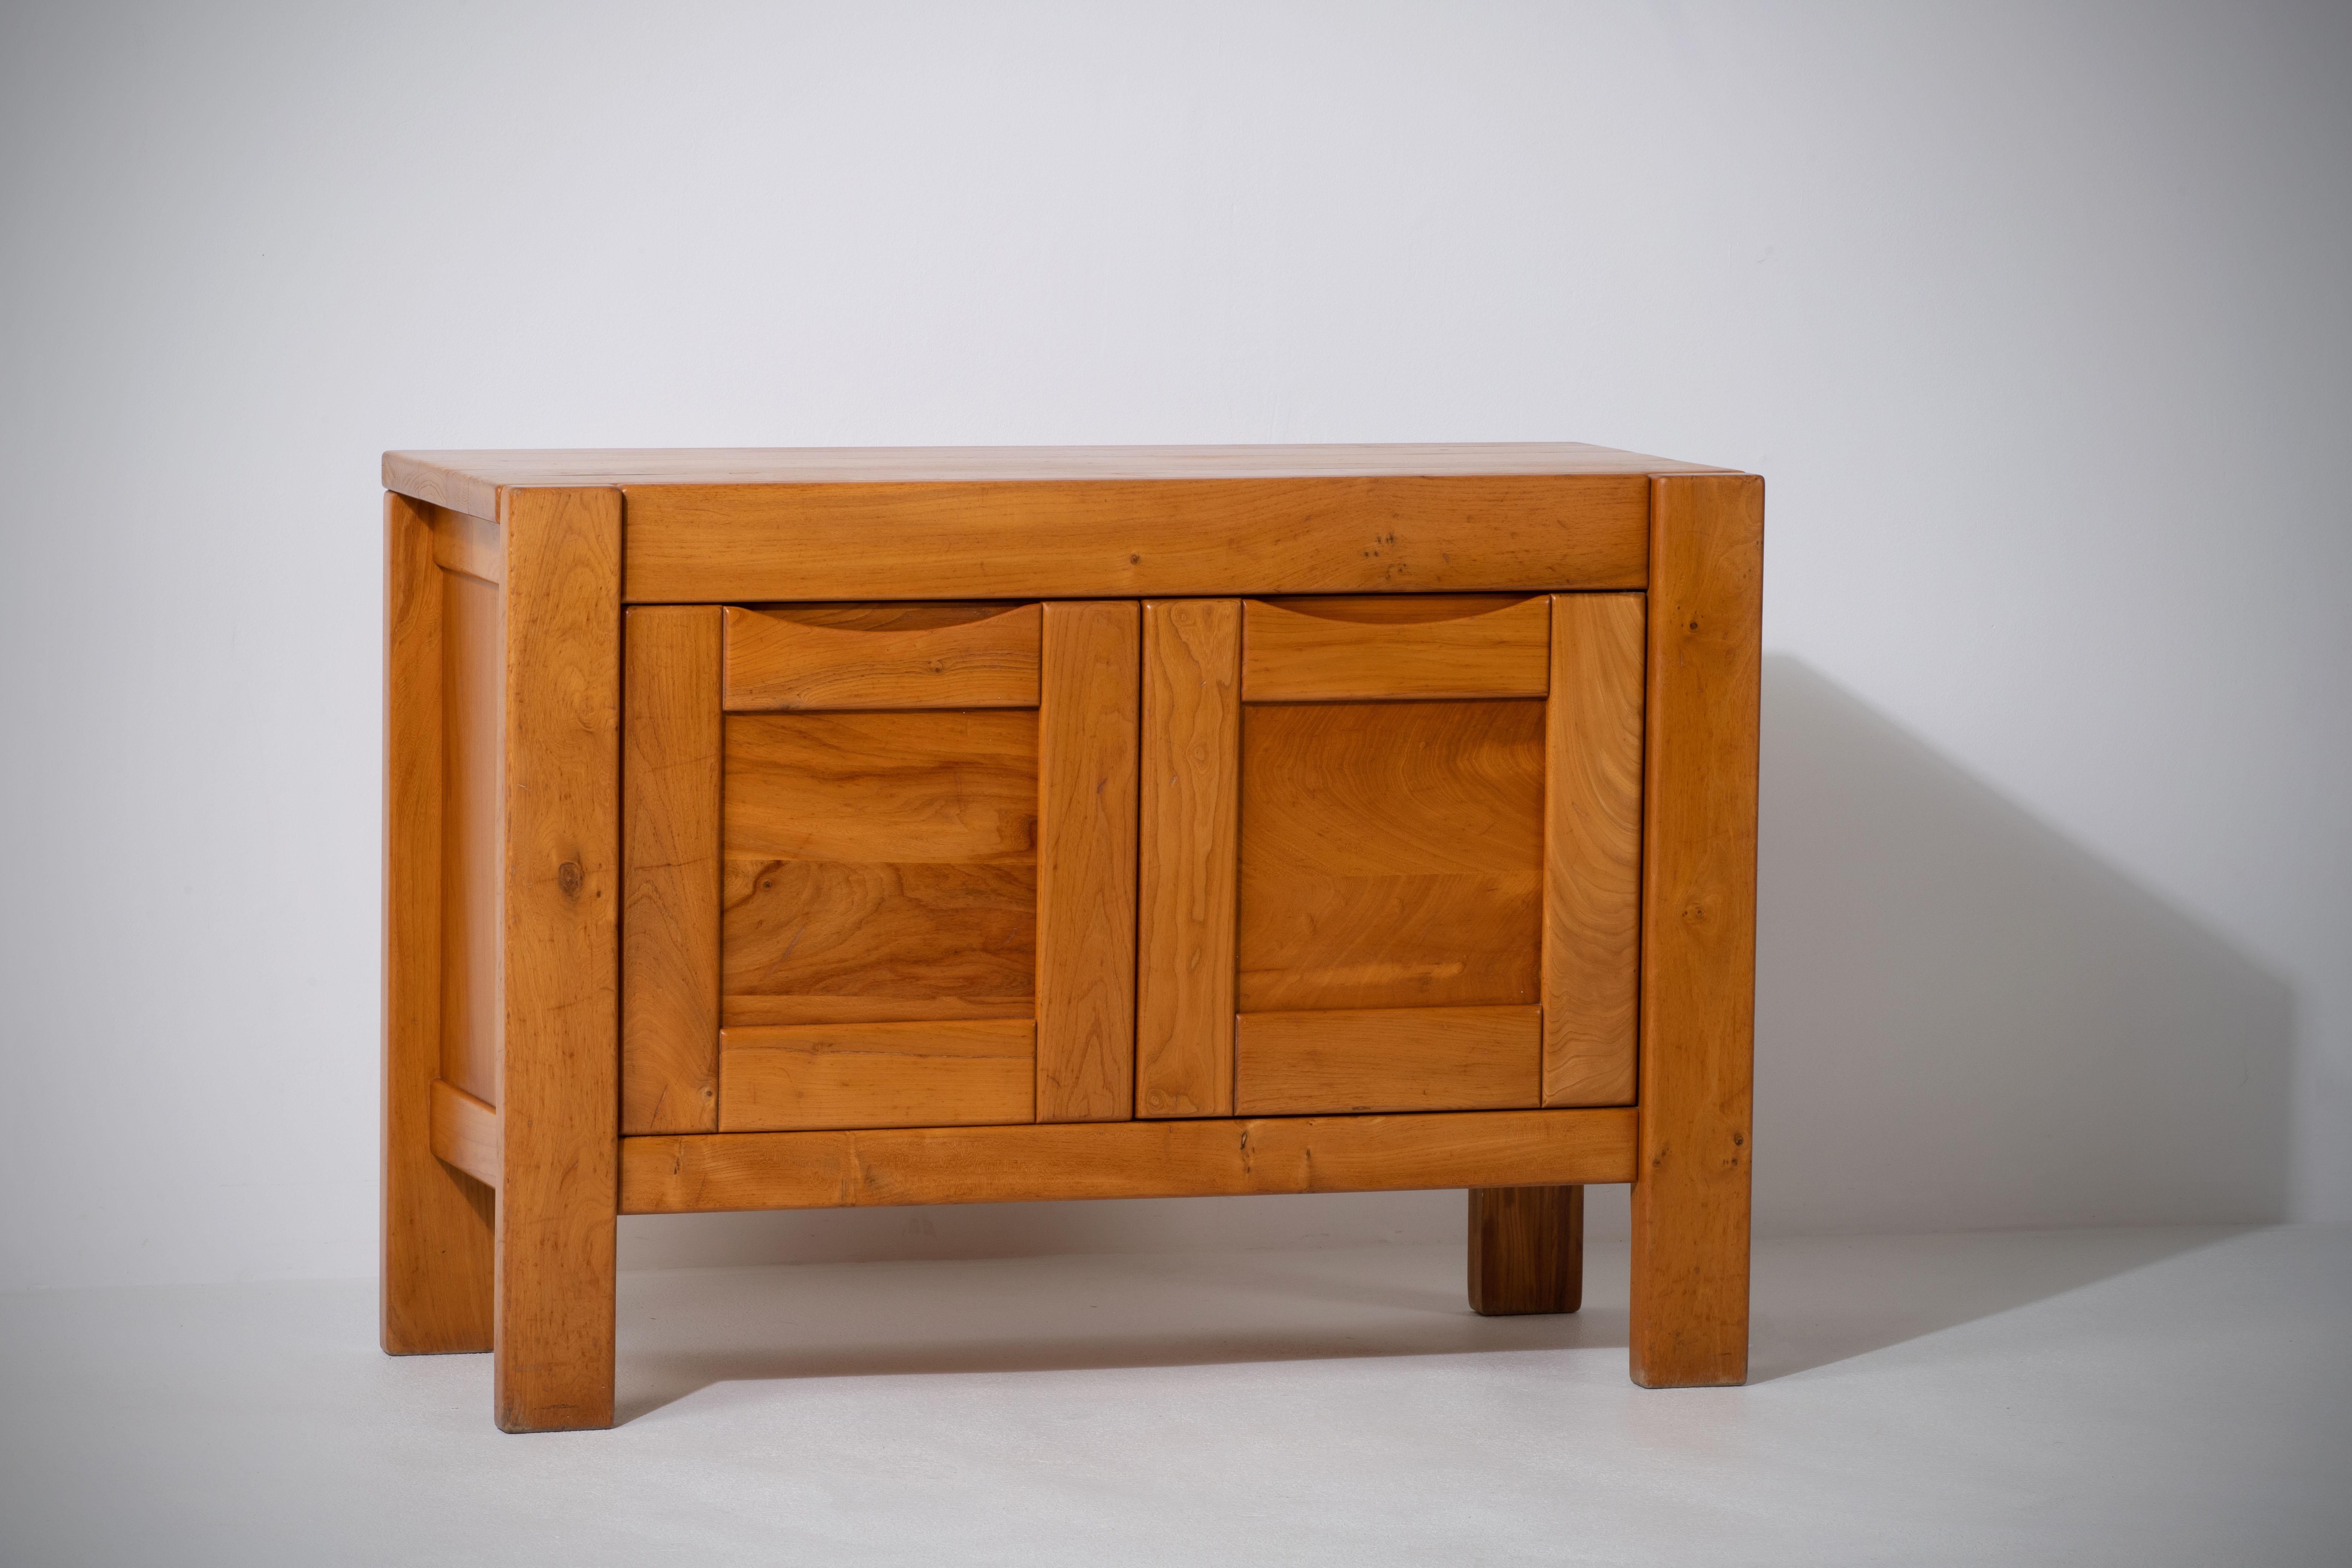 Introducing an impressive two-door sideboard attributed to the esteemed Maison Regain, a French furniture design house known for its exceptional craftsmanship and commitment to quality. Crafted in the late 1970s with skill and expertise in the